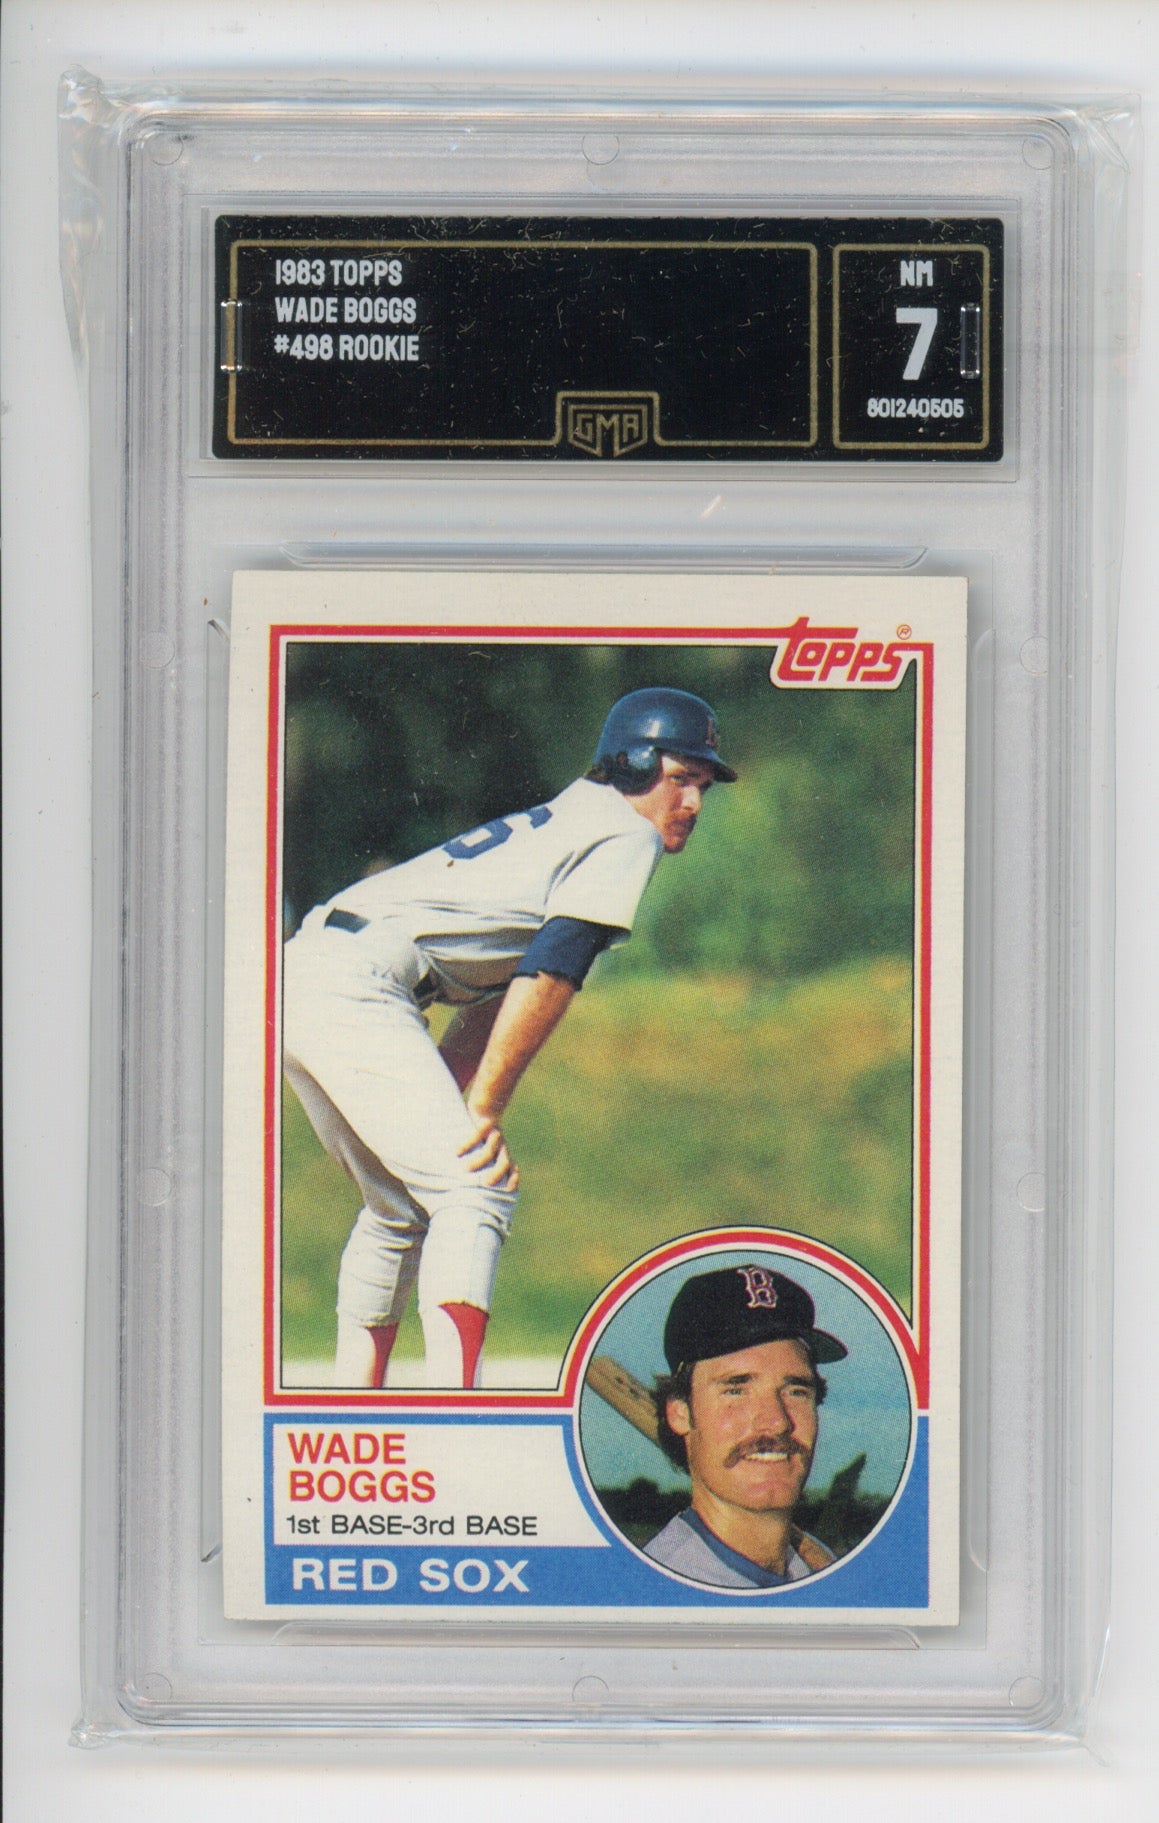 1983 Toppg Wade Boggs #498 Rookie GMA 7